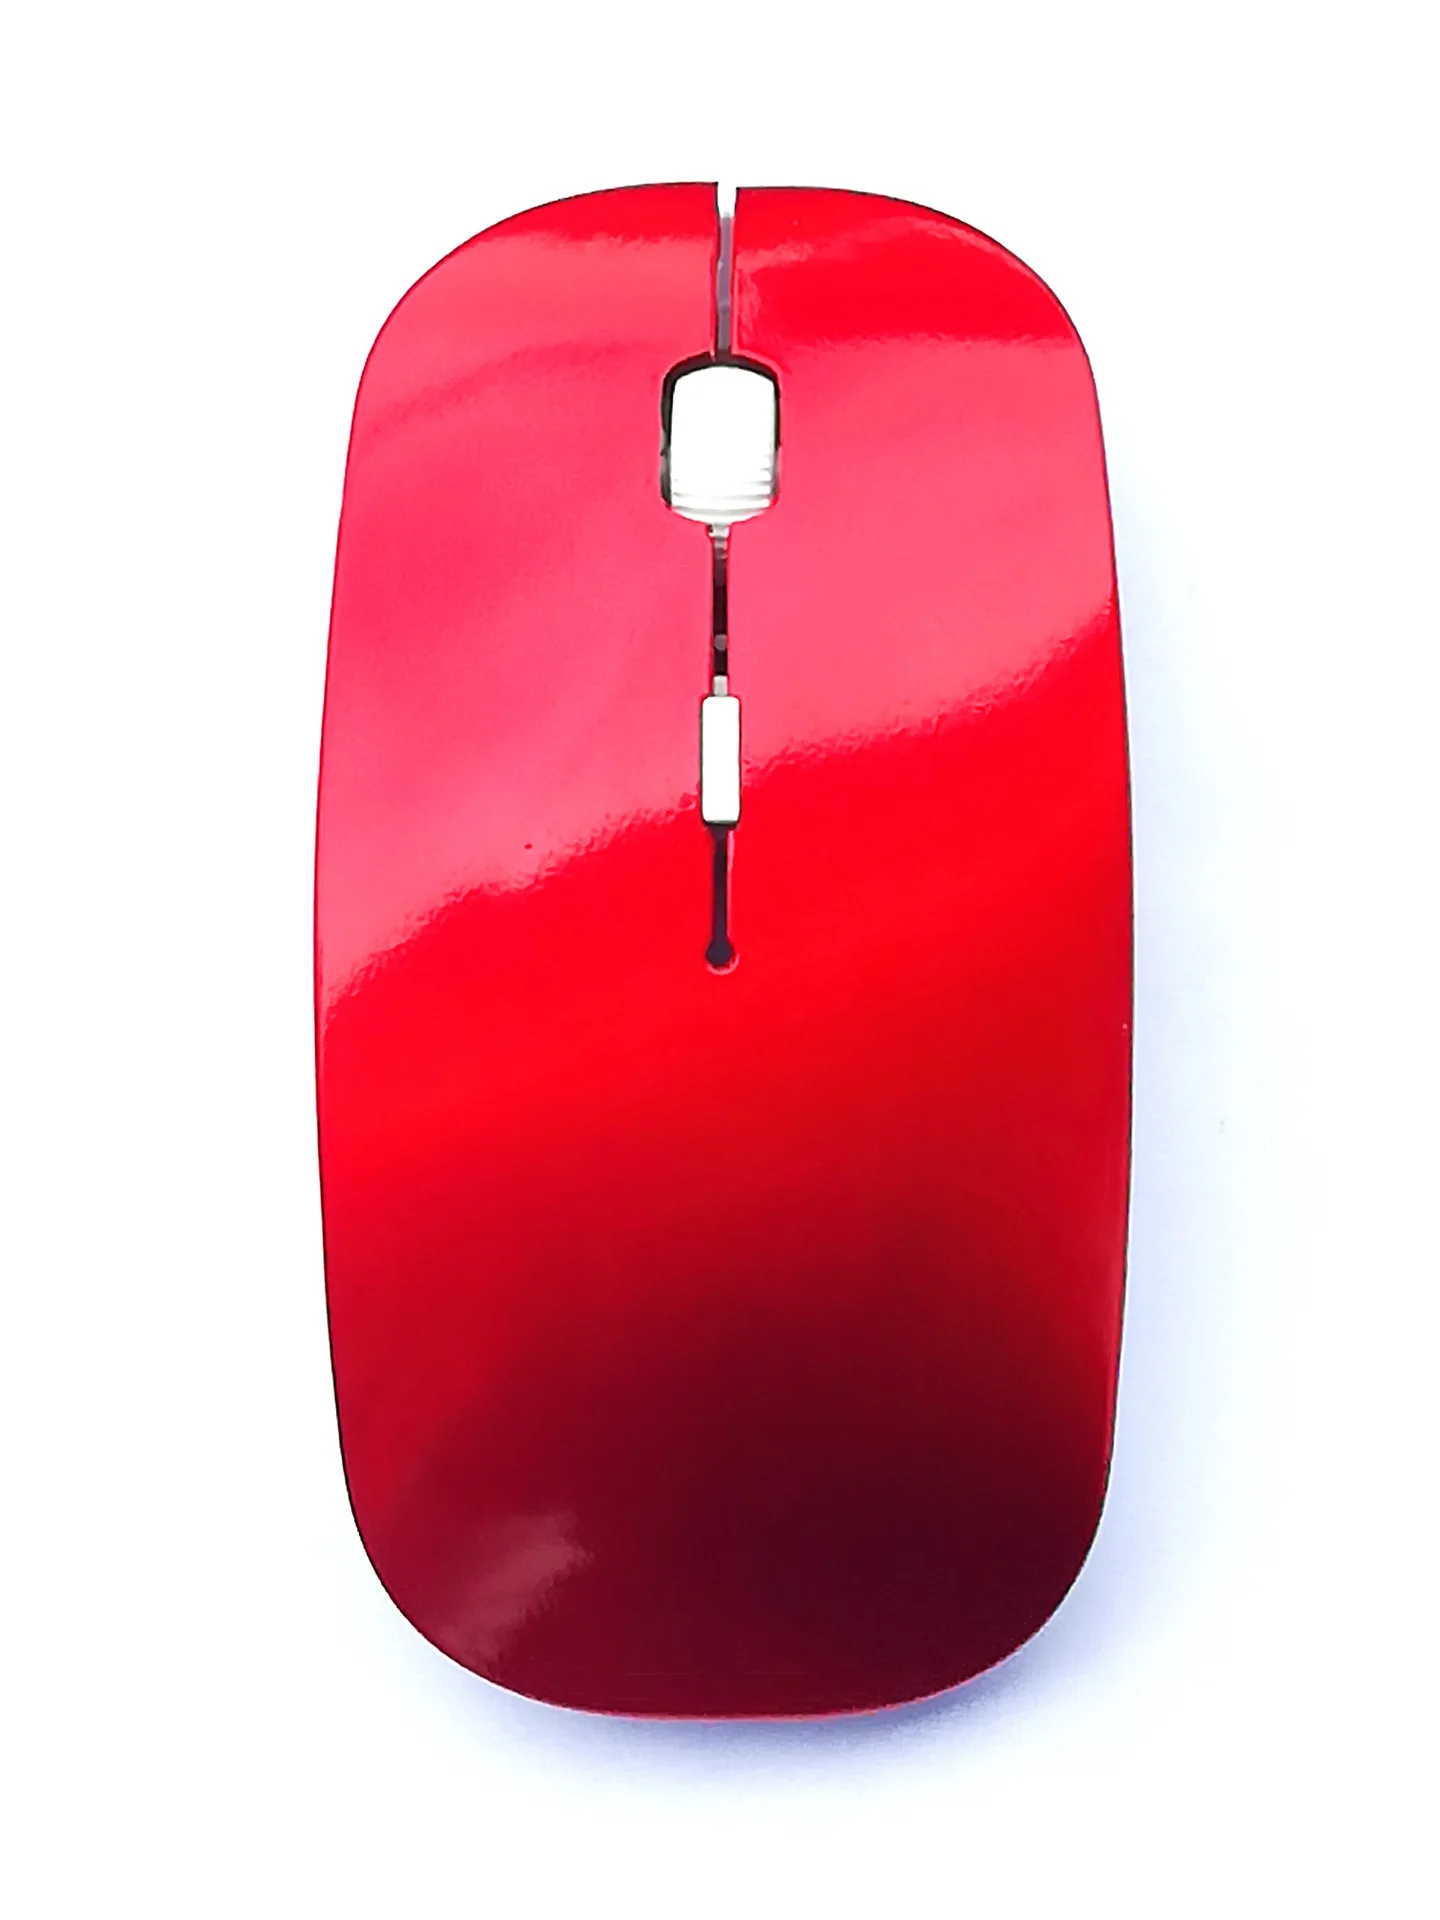 New USB Optical Wireless Computer Mouse 2.4G Receiver Super Slim Mouse For PC Laptop images - 6